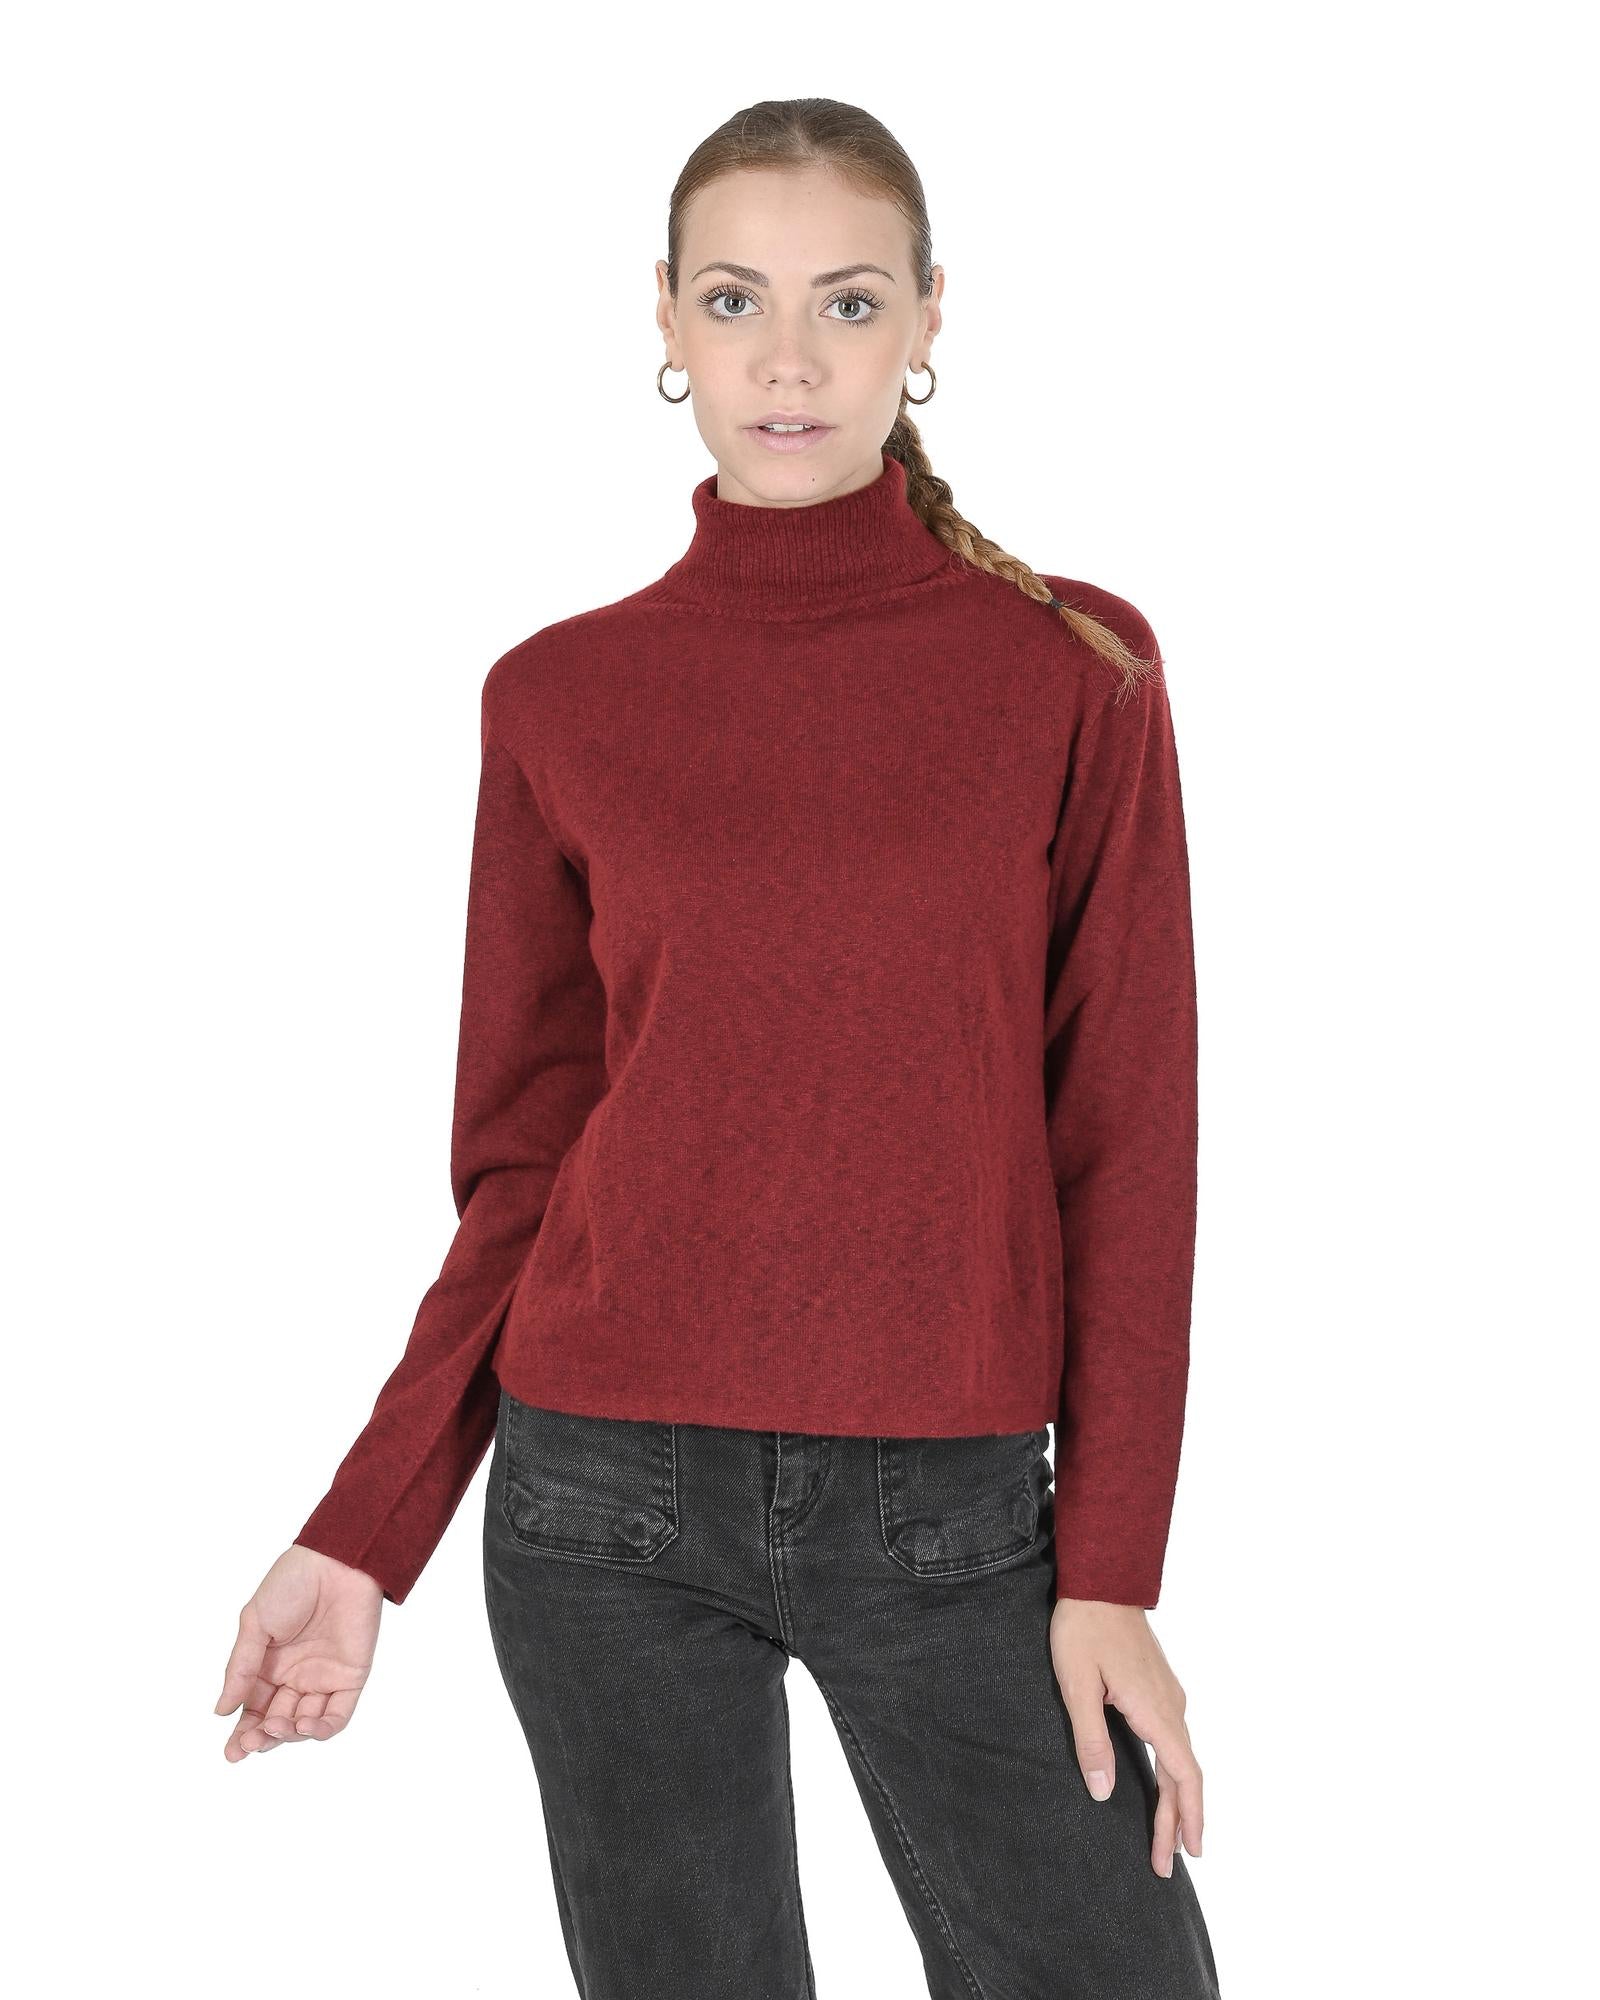 Cashmere Turtleneck Sweater Made in Italy - M